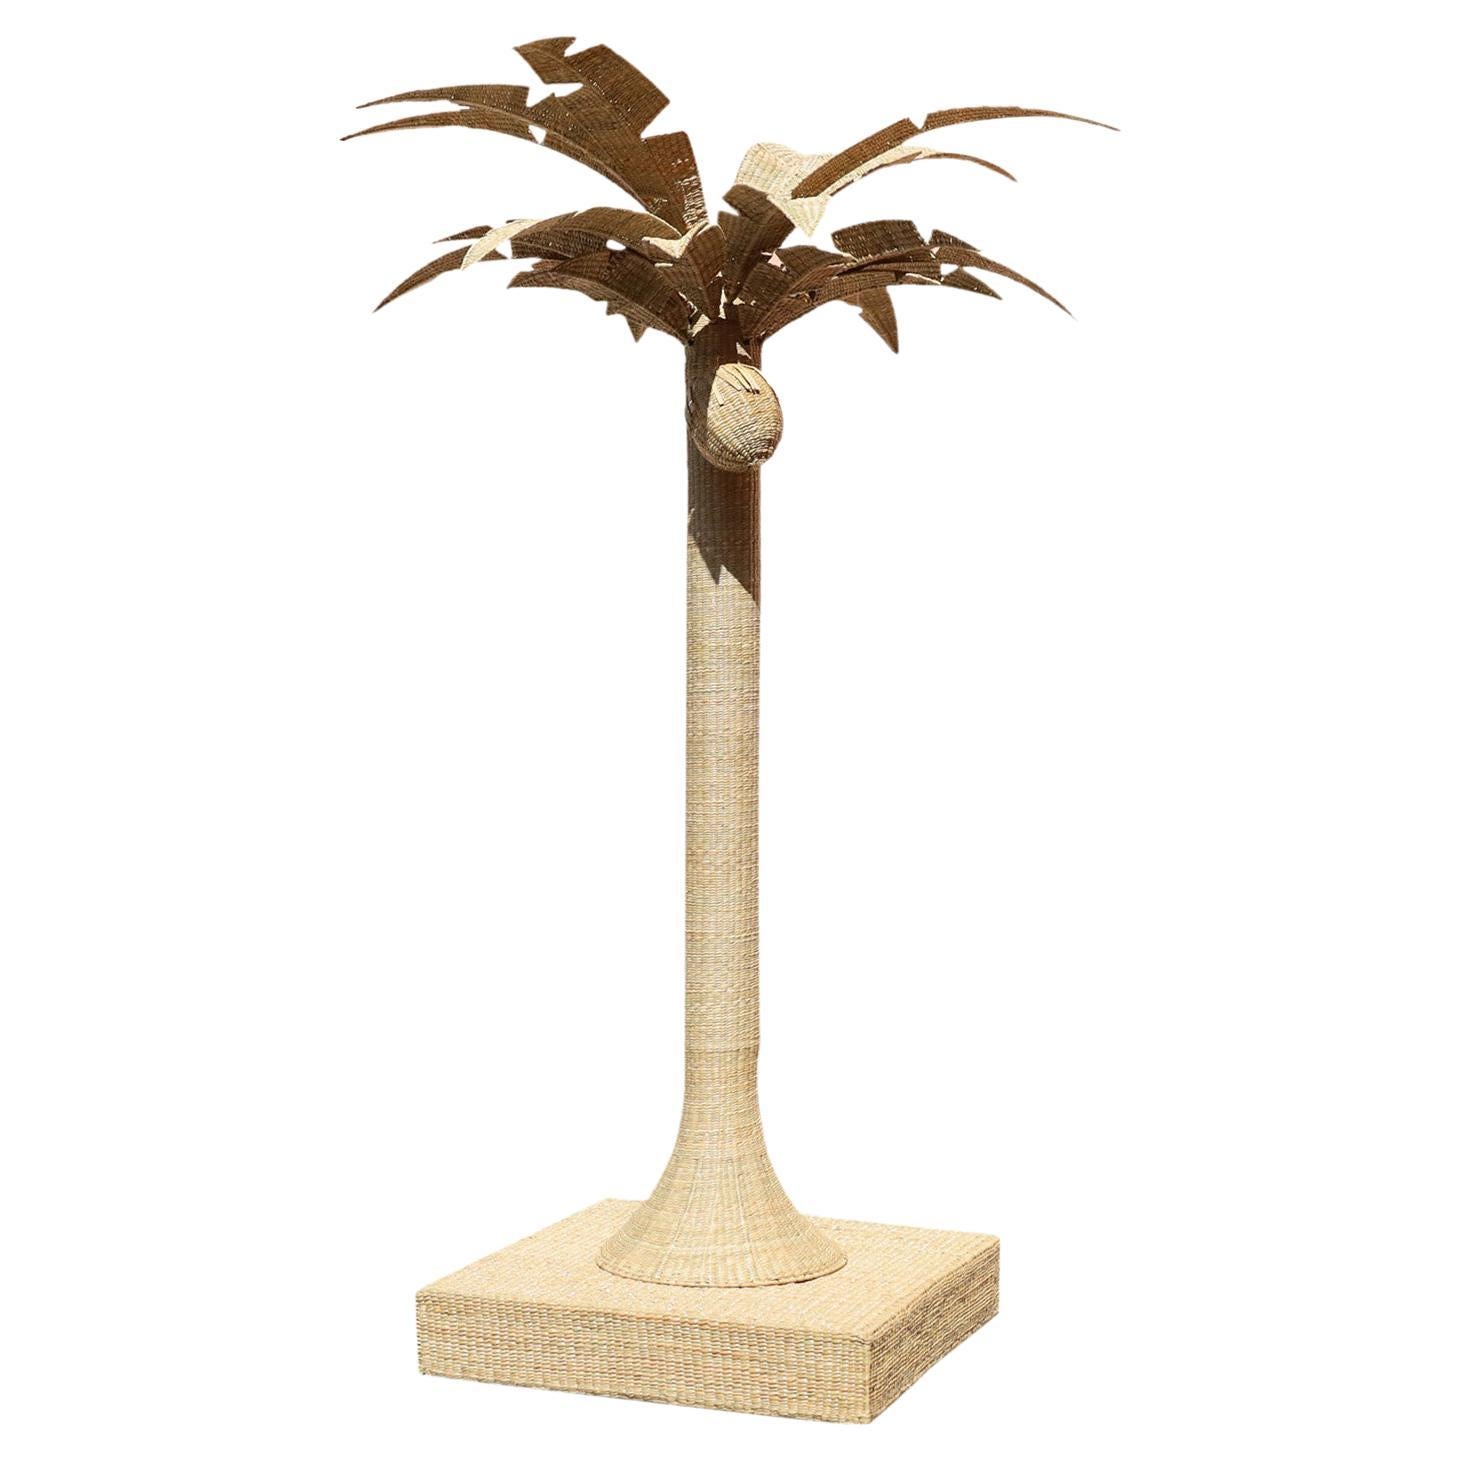 Life Size Wicker Palm Tree Sculpture from the FS Flores Collection For Sale